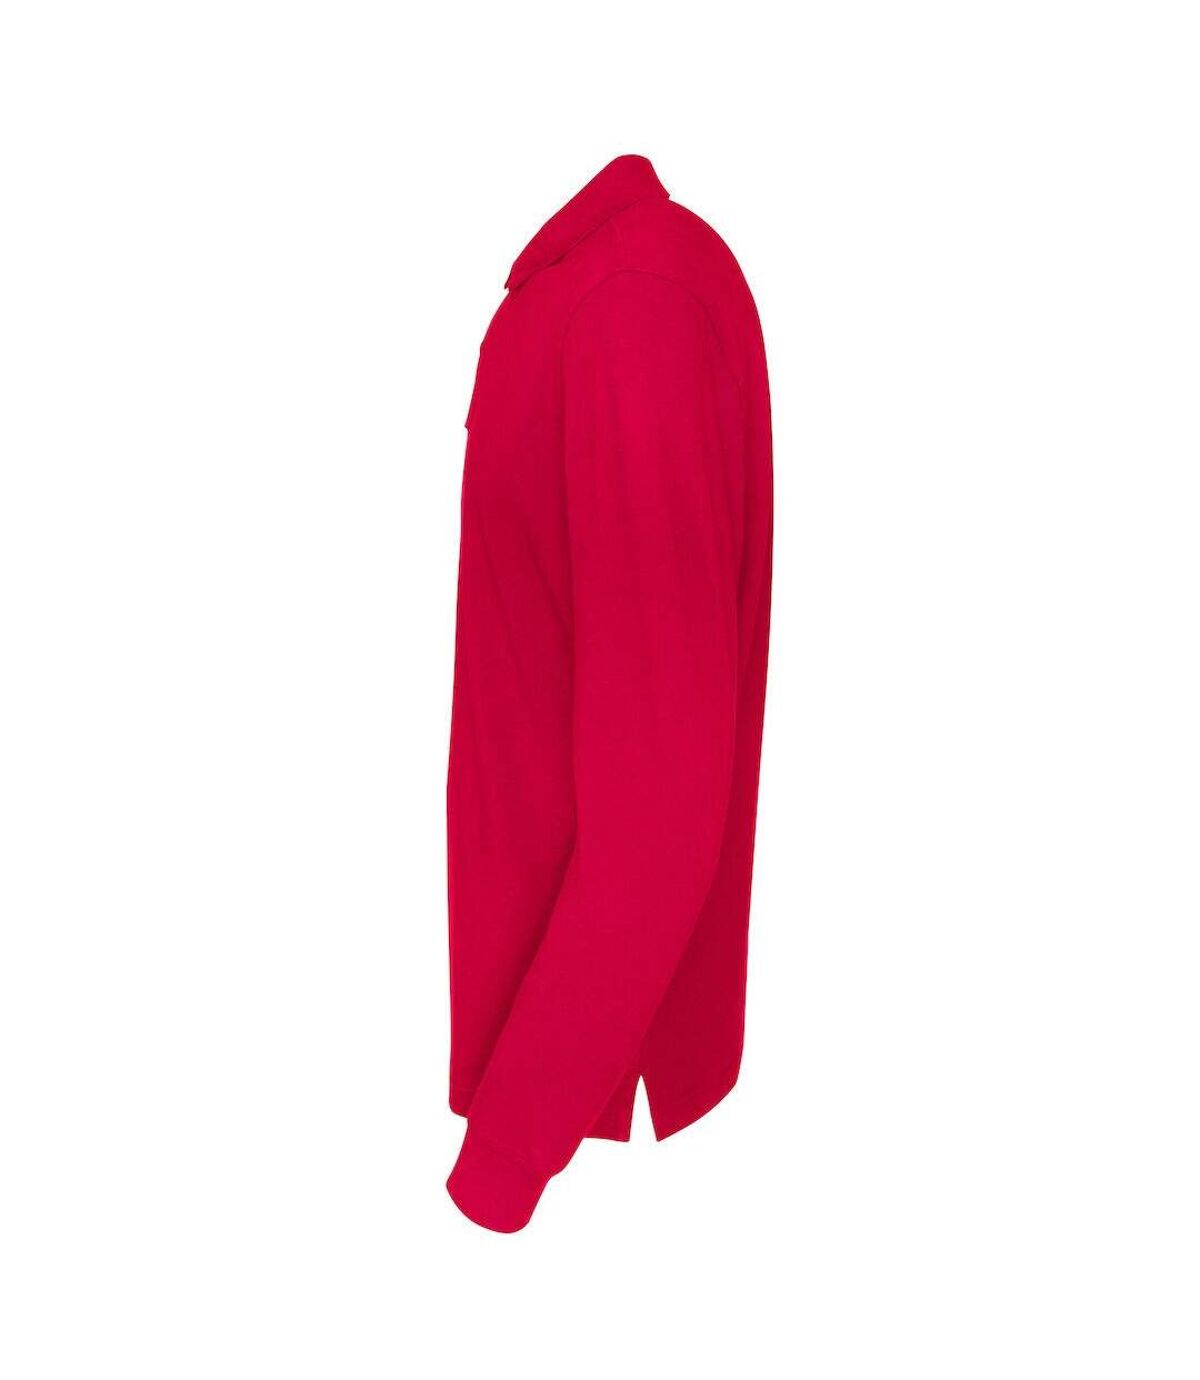 Cottover - T-shirt - Homme (Rouge) - UTUB525